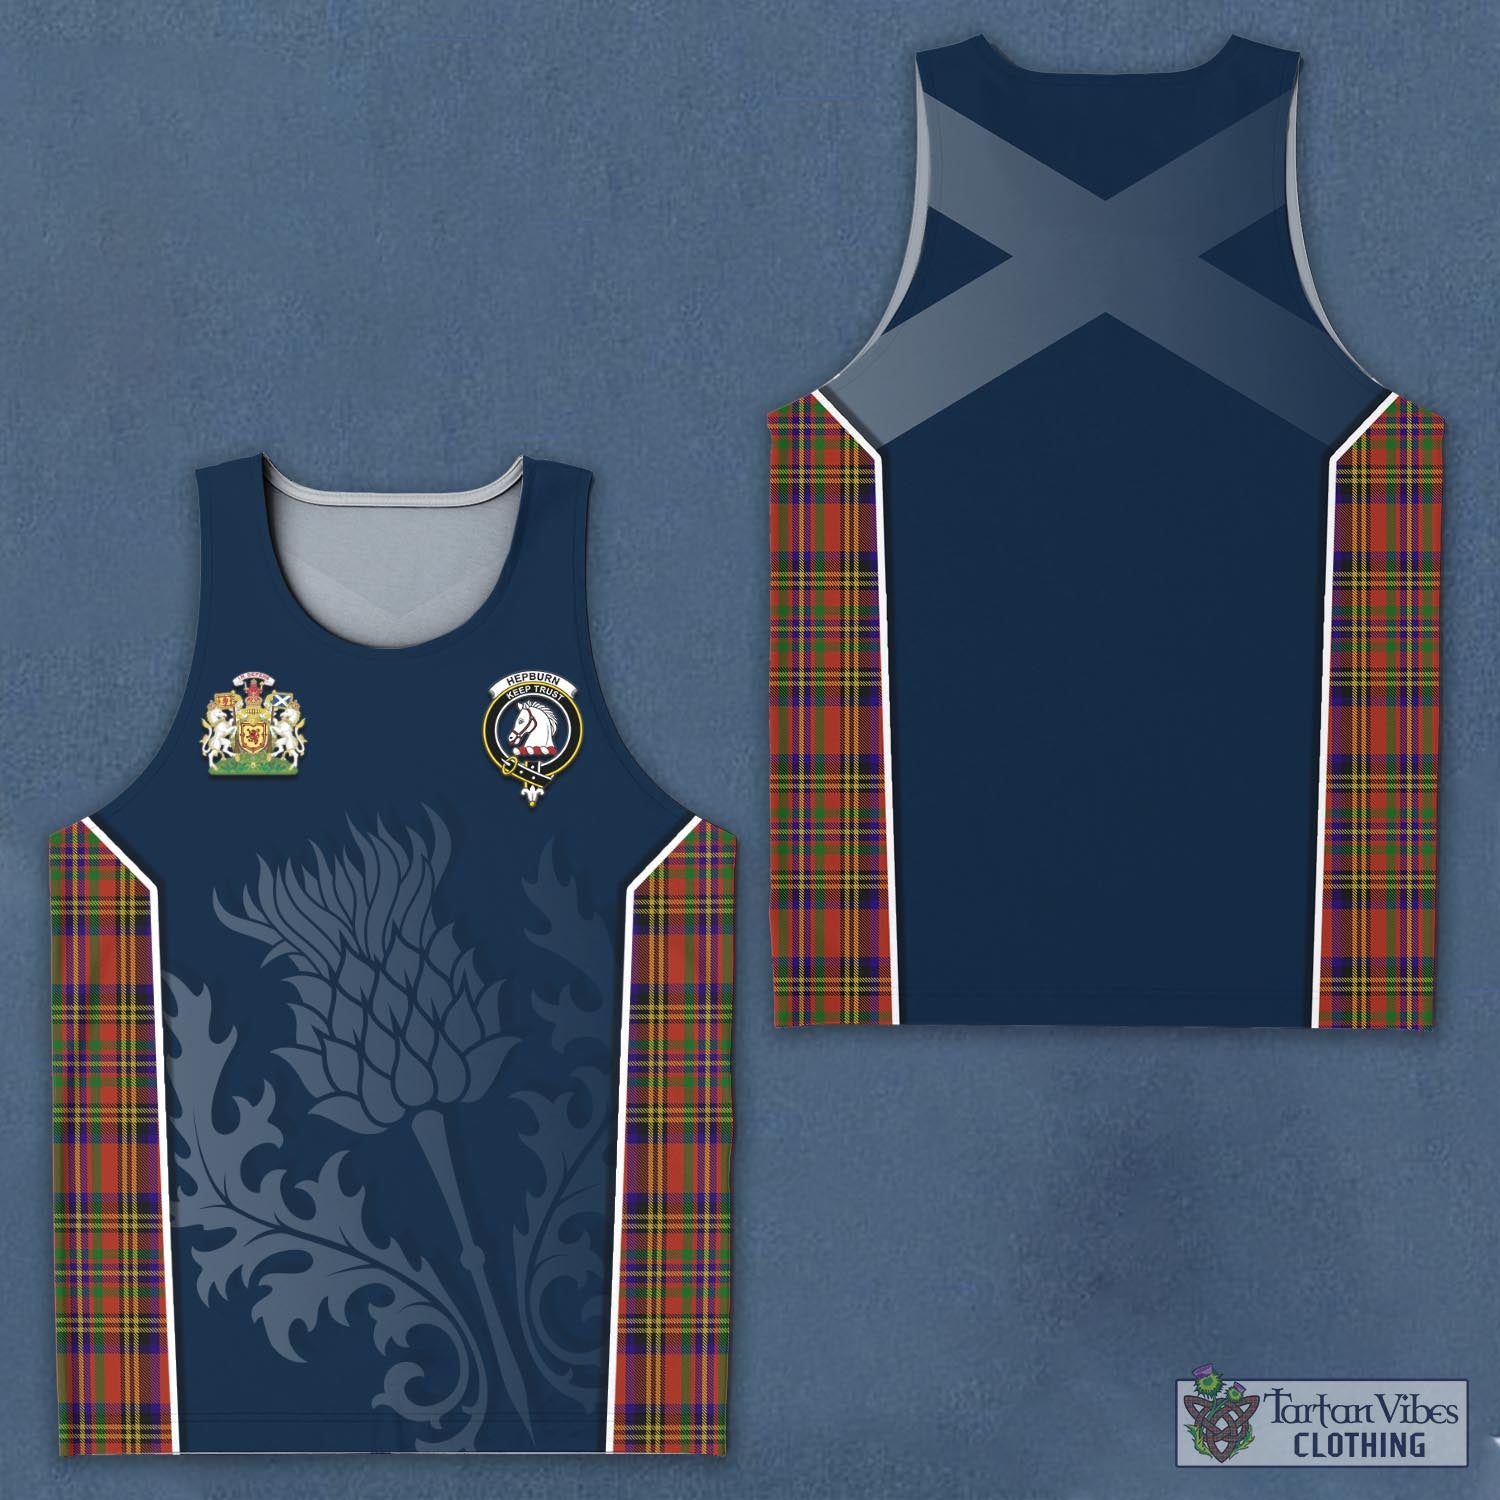 Tartan Vibes Clothing Hepburn Tartan Men's Tanks Top with Family Crest and Scottish Thistle Vibes Sport Style